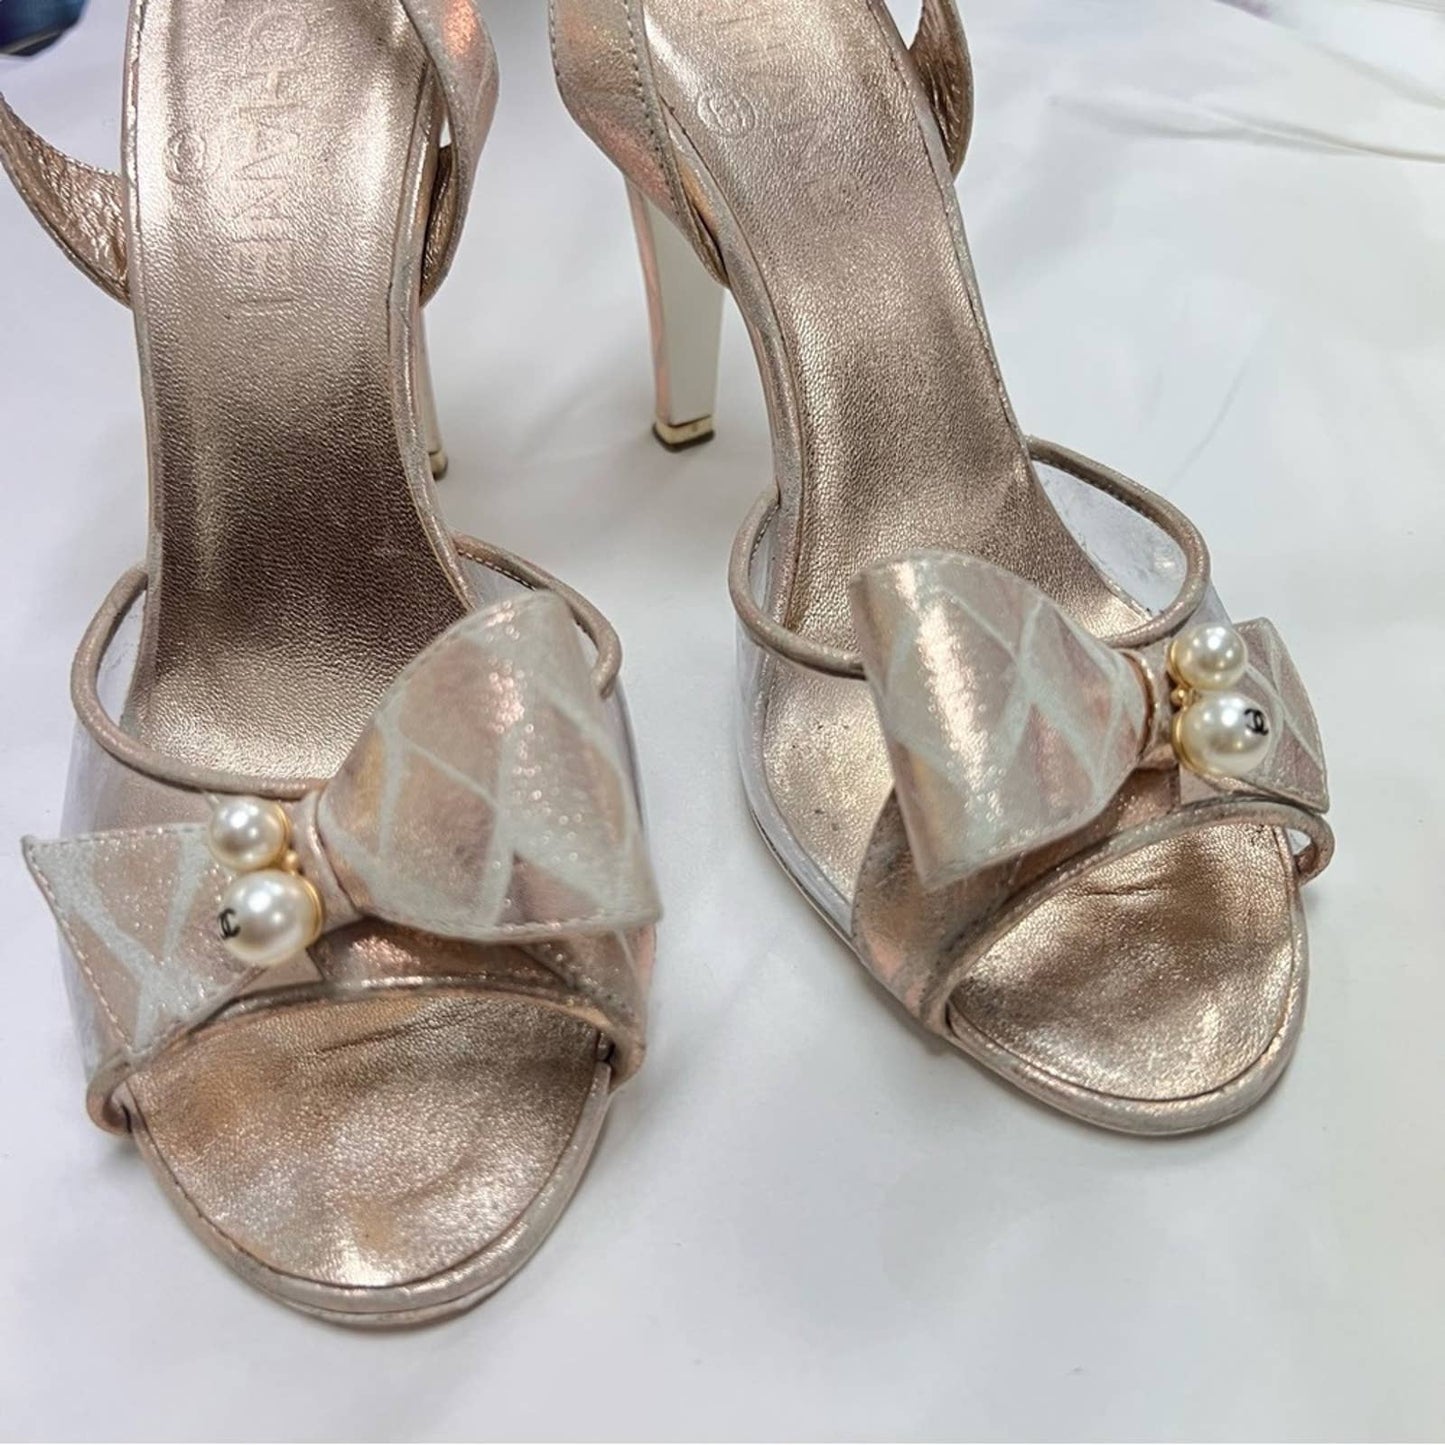 CHANEL Champagne D’orsay Bow Top Heels 36.5”